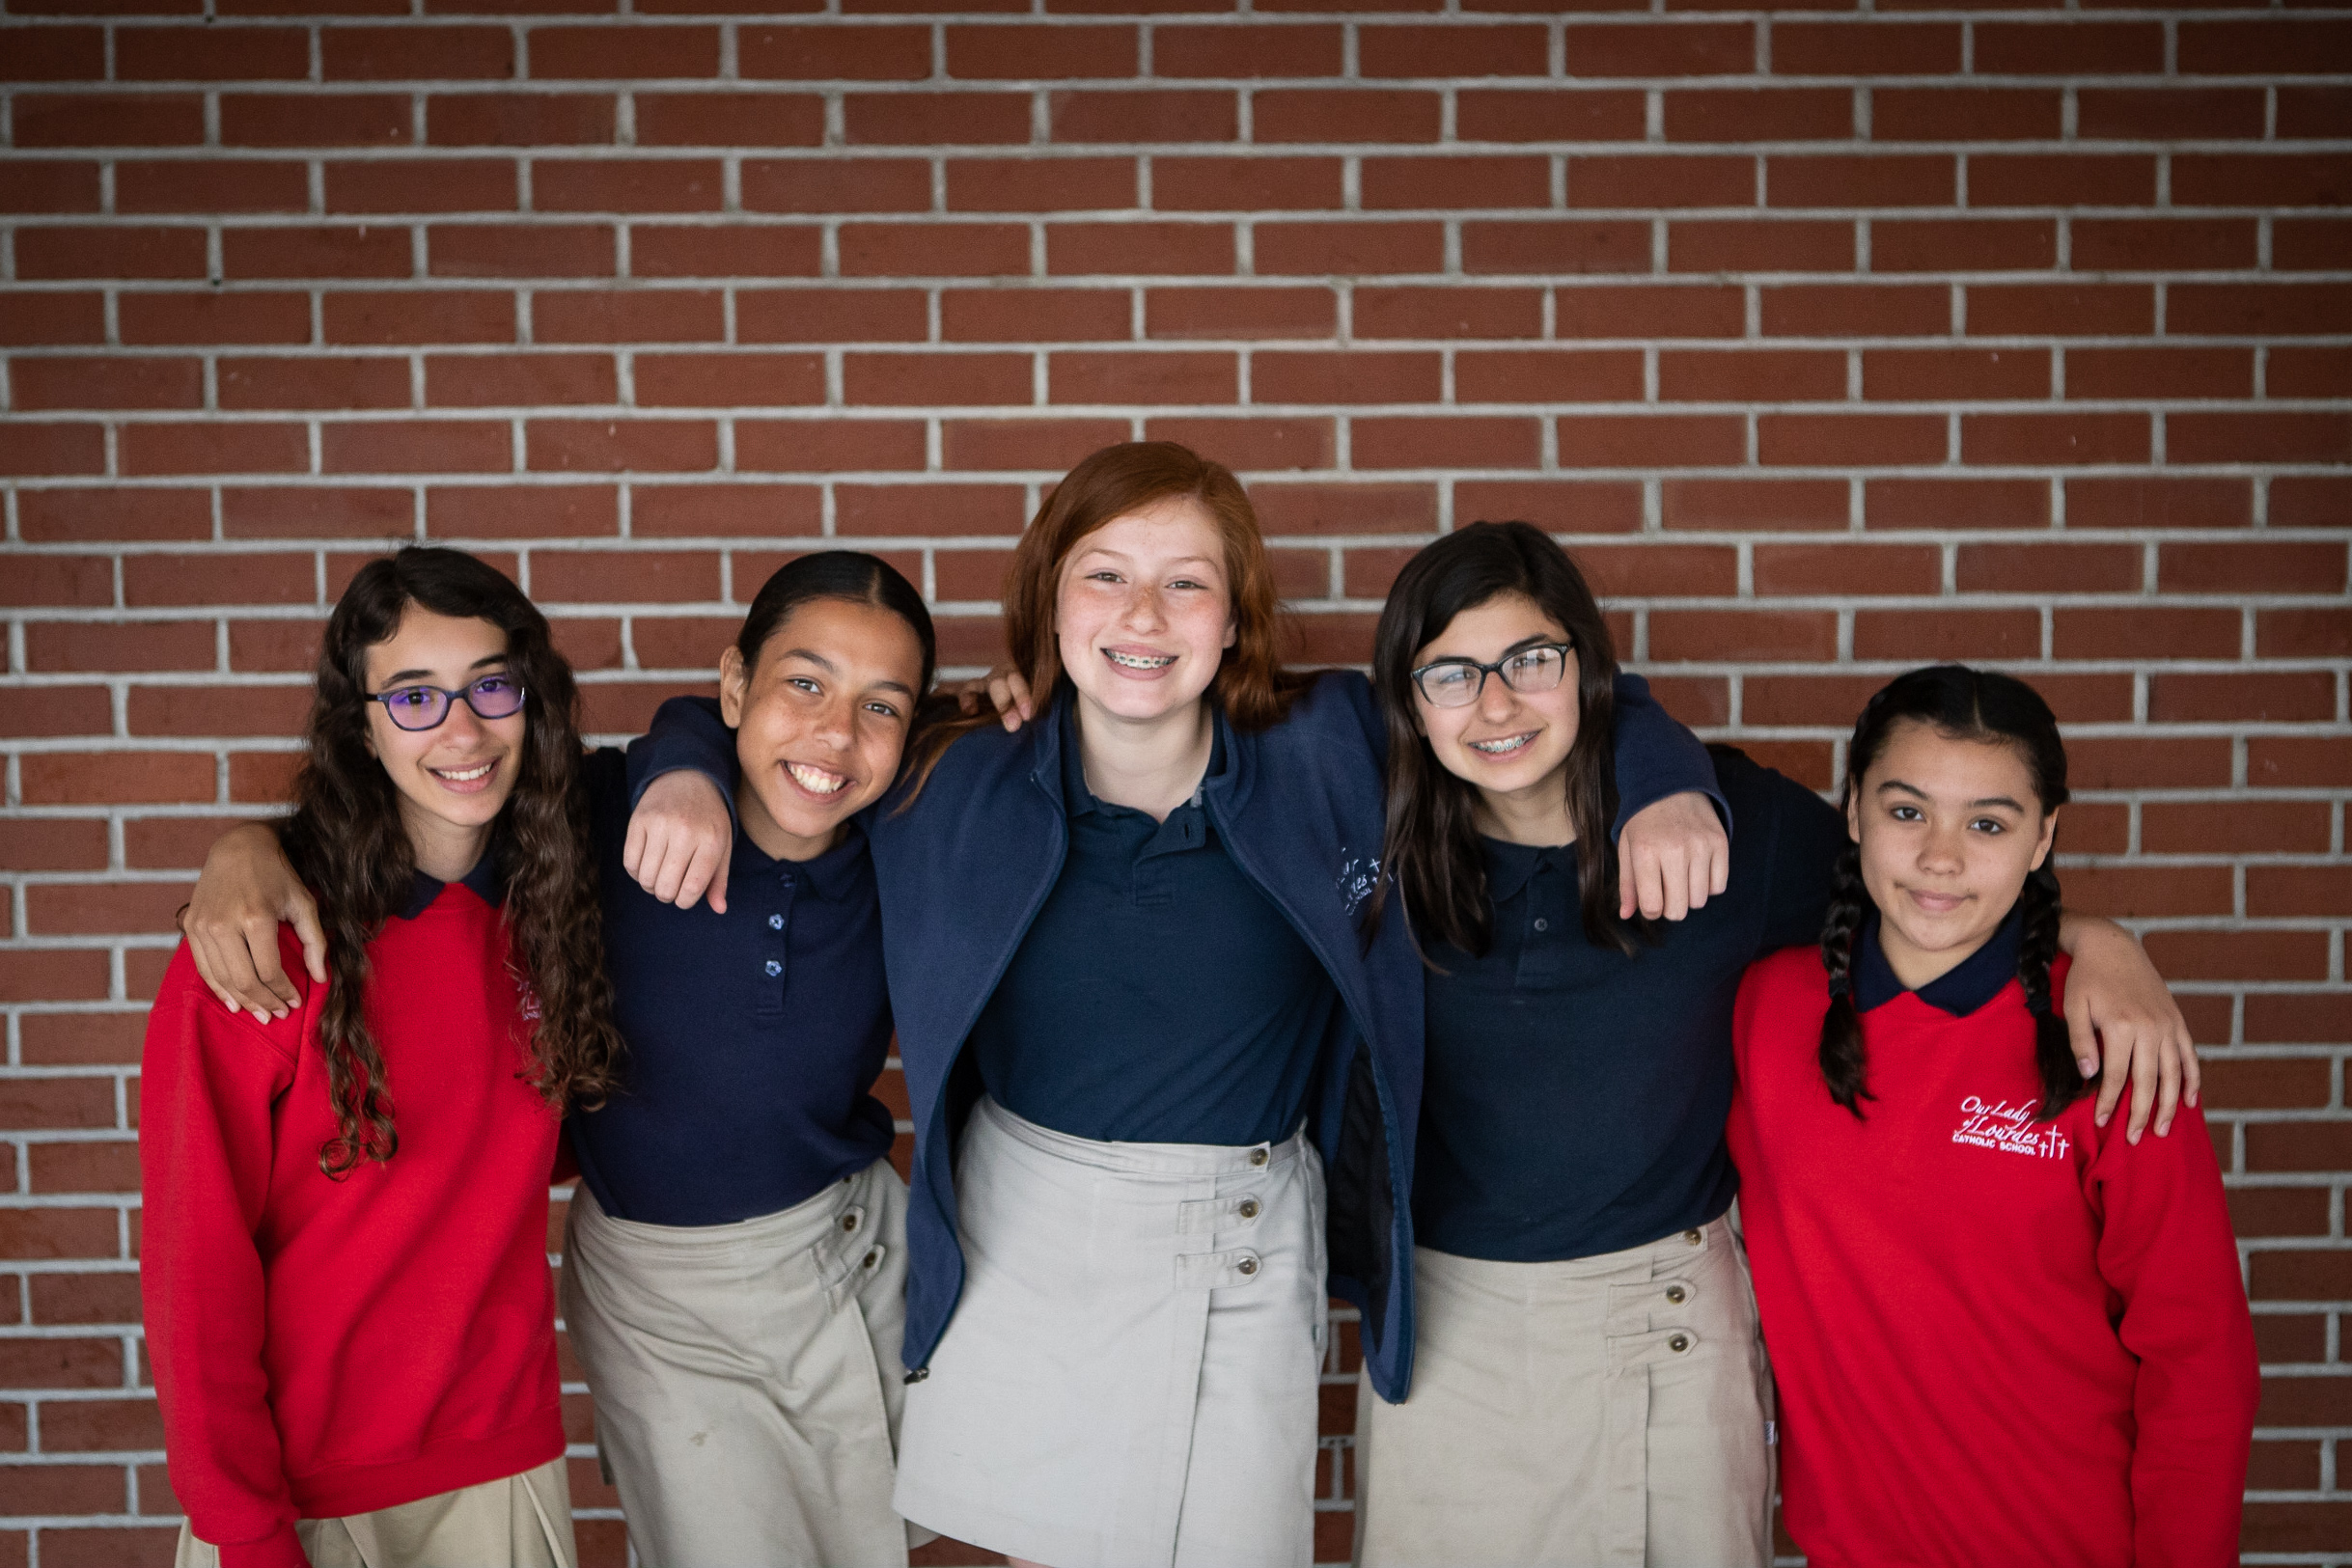 Our Lady of Lourdes Catholic School Middle School Students